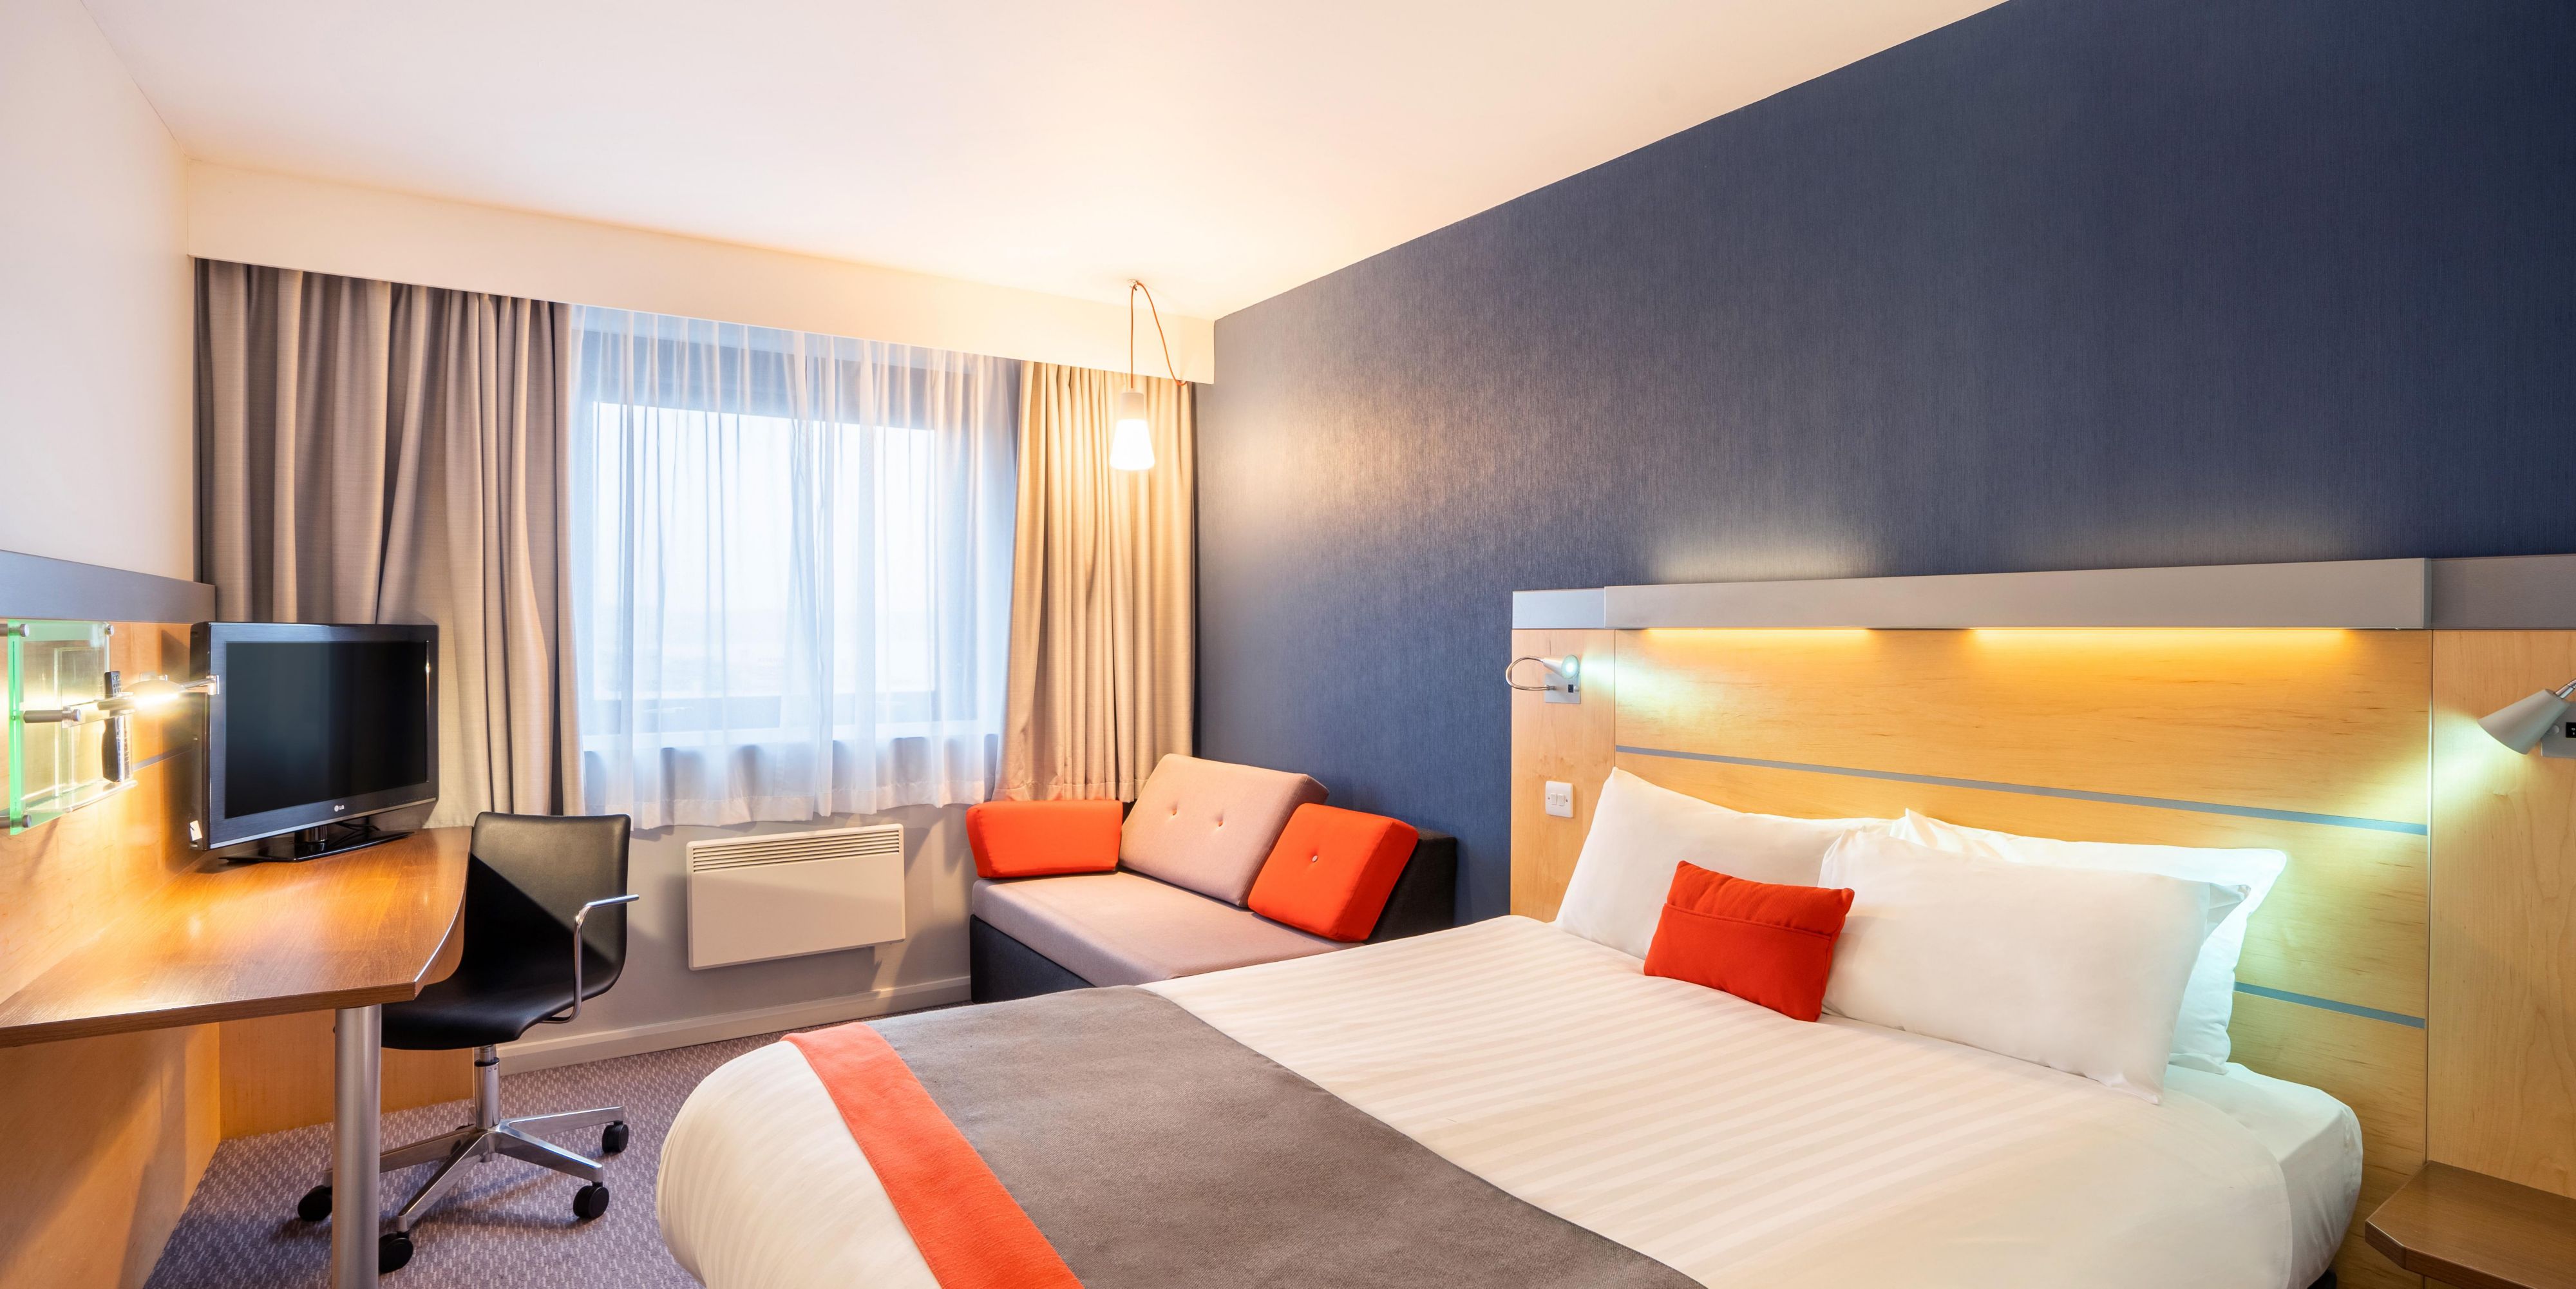 For the last few months, our bedrooms have been undergoing a transformation! We are pleased to announce that all rooms at Holiday Inn Express Dundee have now been fully refurbished! 

Our new rooms are stunning and we cannot wait to welcome our guests back to show them off! 

Click to find out more.